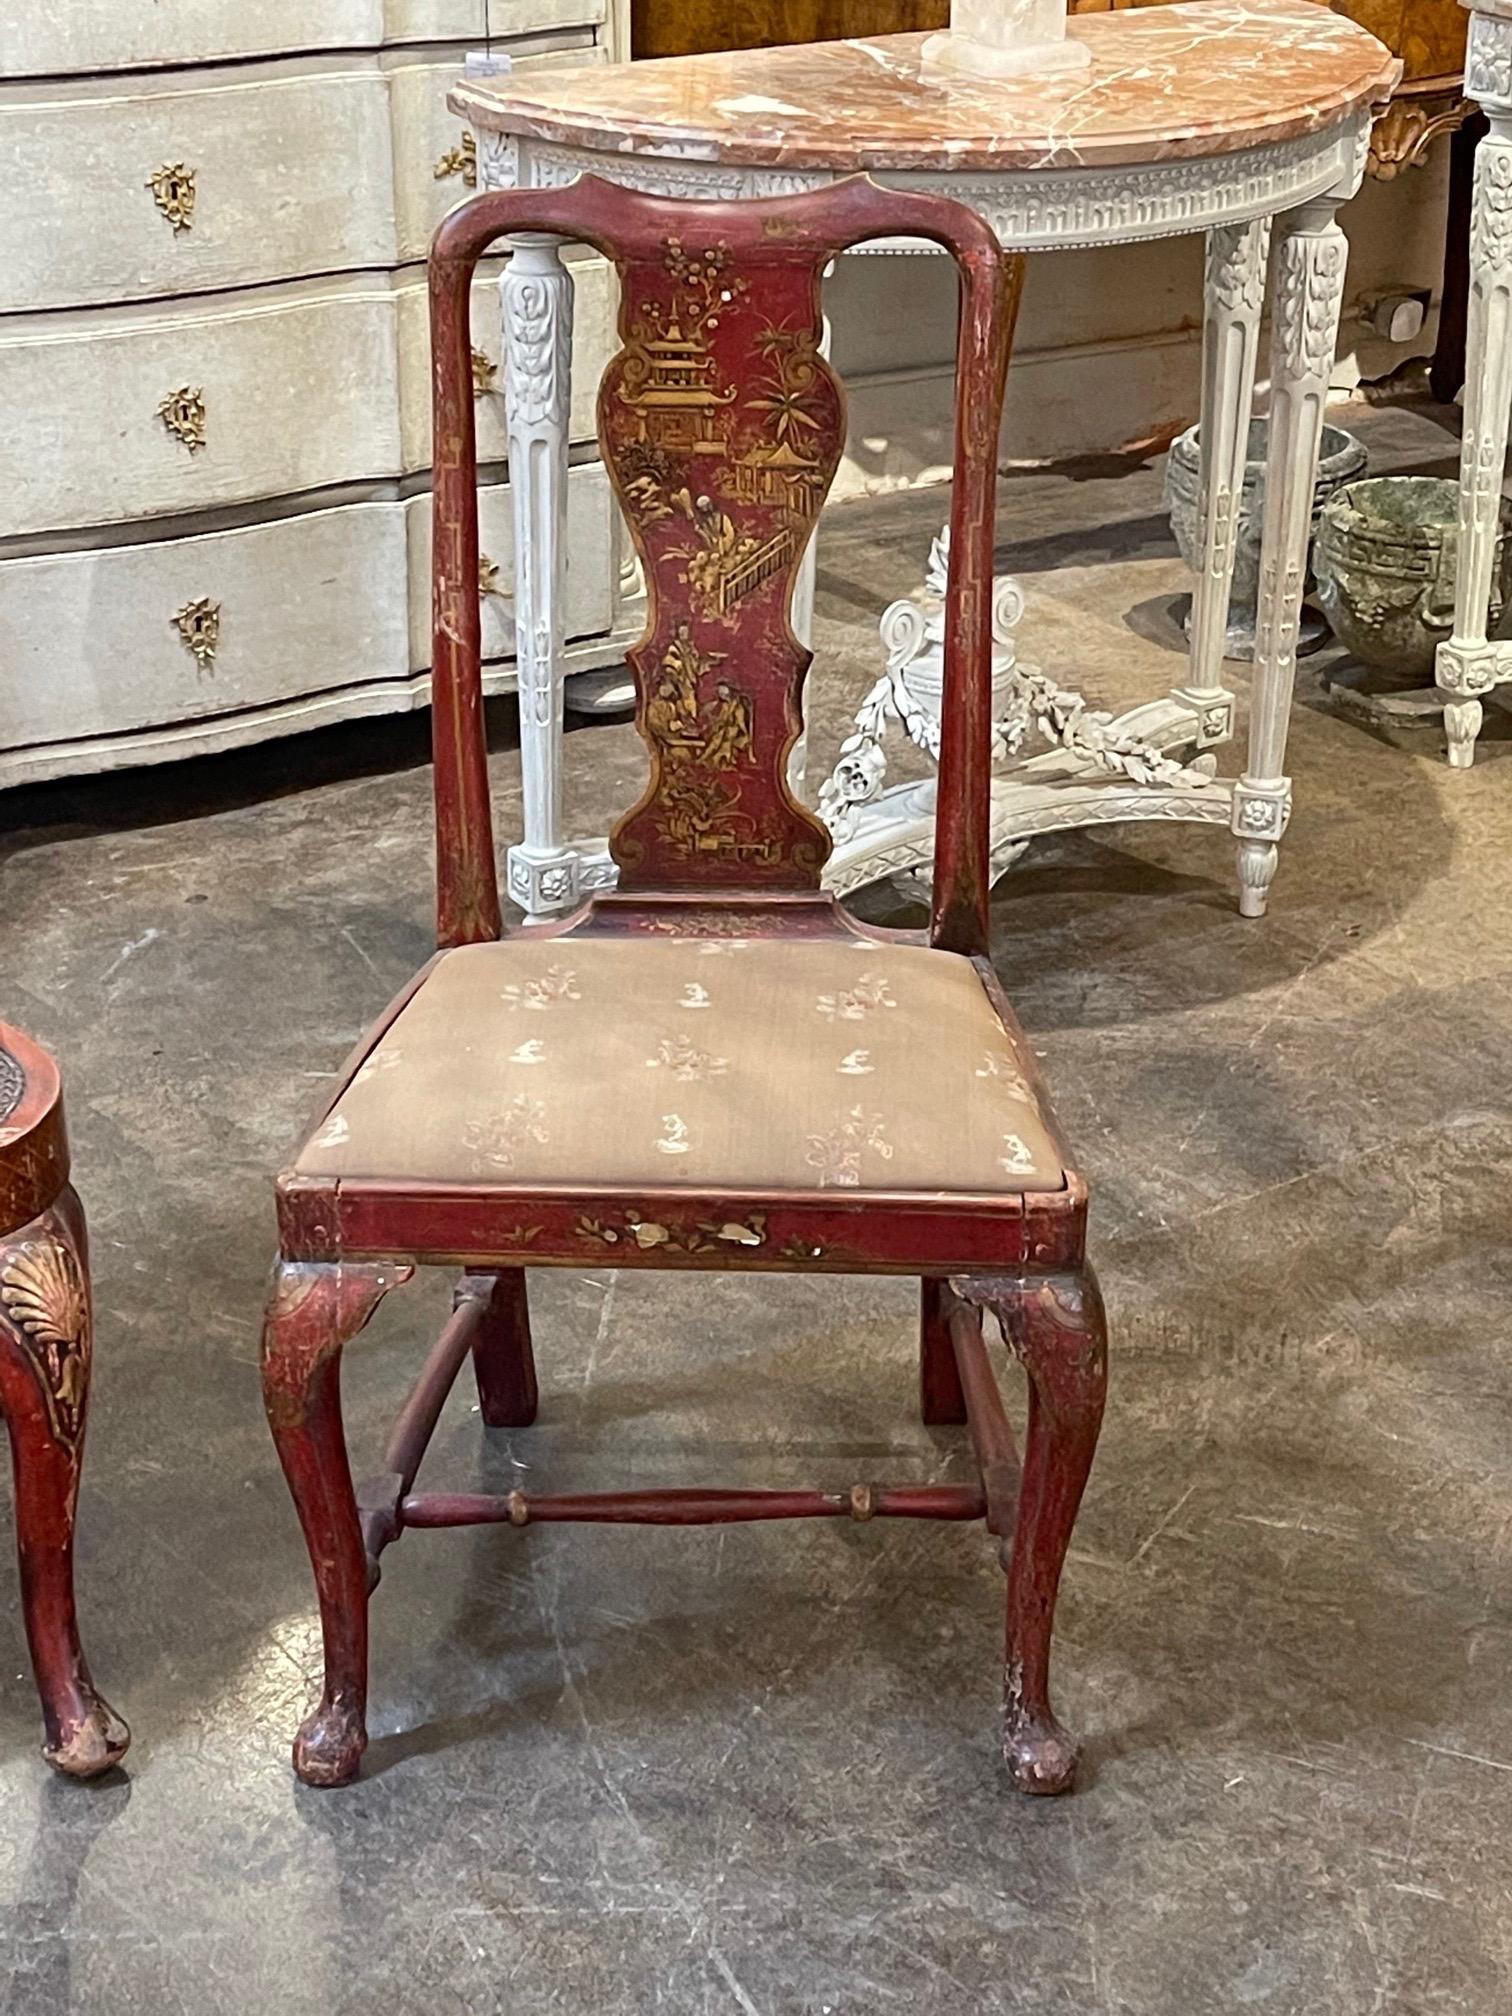 Beautiful 19th century English Queen Anne red lacquered chinoiserie side chair. Pretty hand painted design!
Note: There is a companion chair. Sold separately.